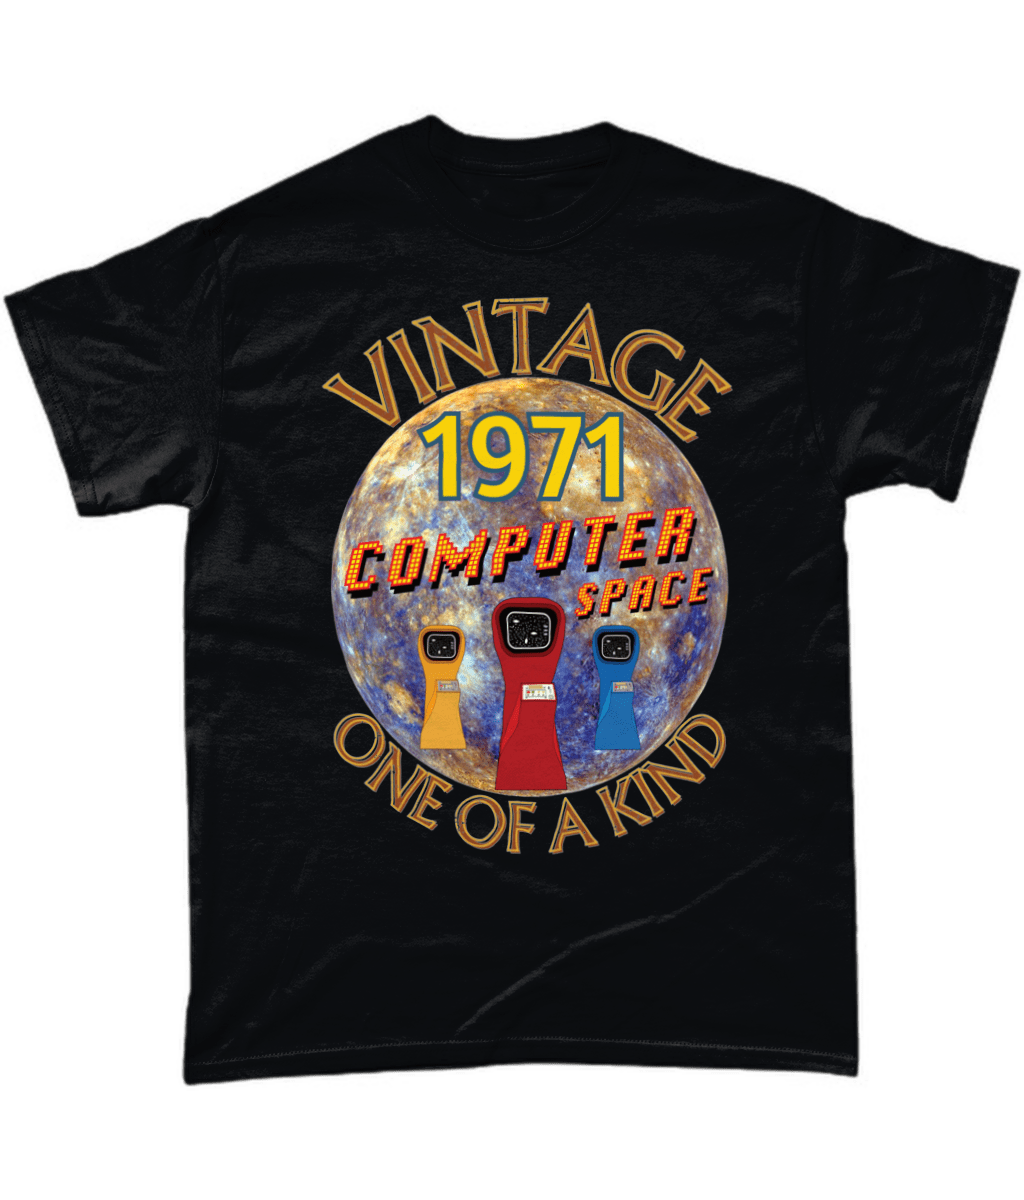 Black T-Shirt with the words vintage,1971,computer space,one of a kind,large earth, 3 computer space arcade machines